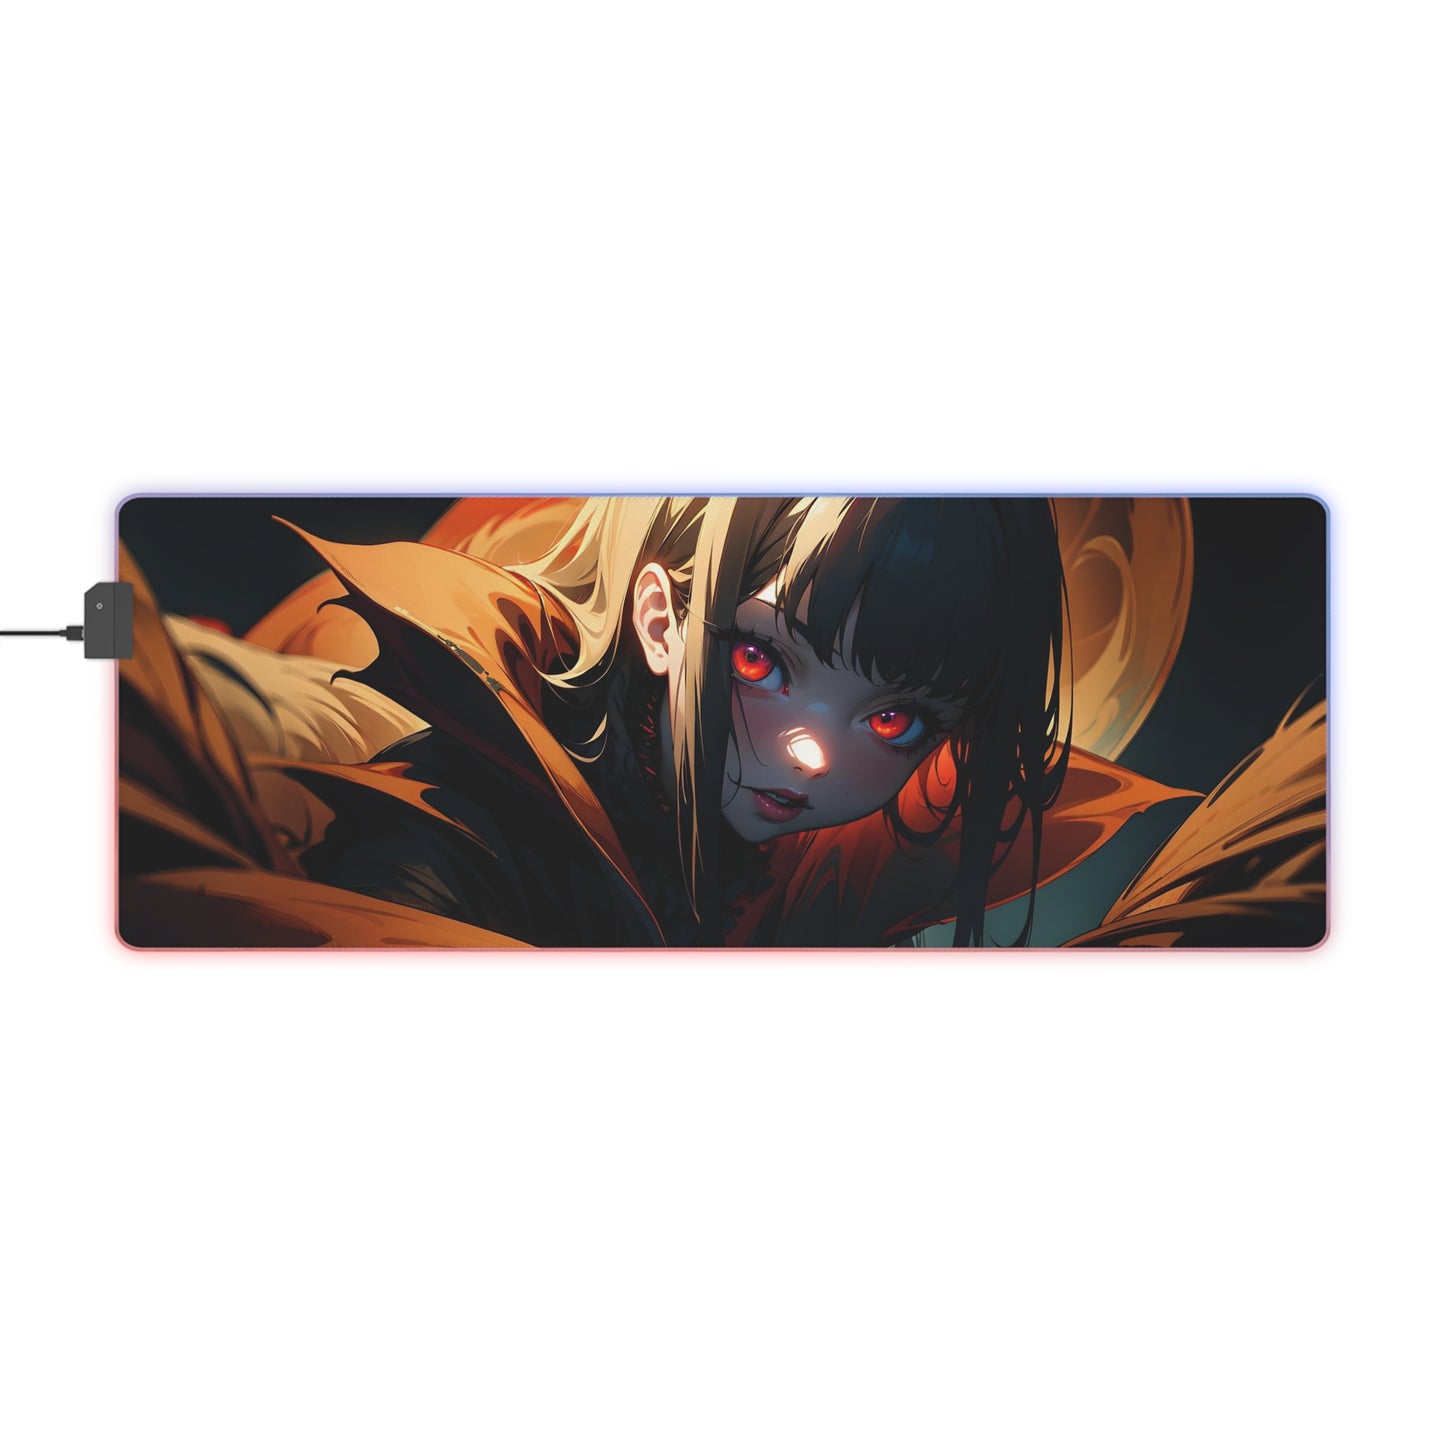 AG-19 LED Gaming Mouse Pad